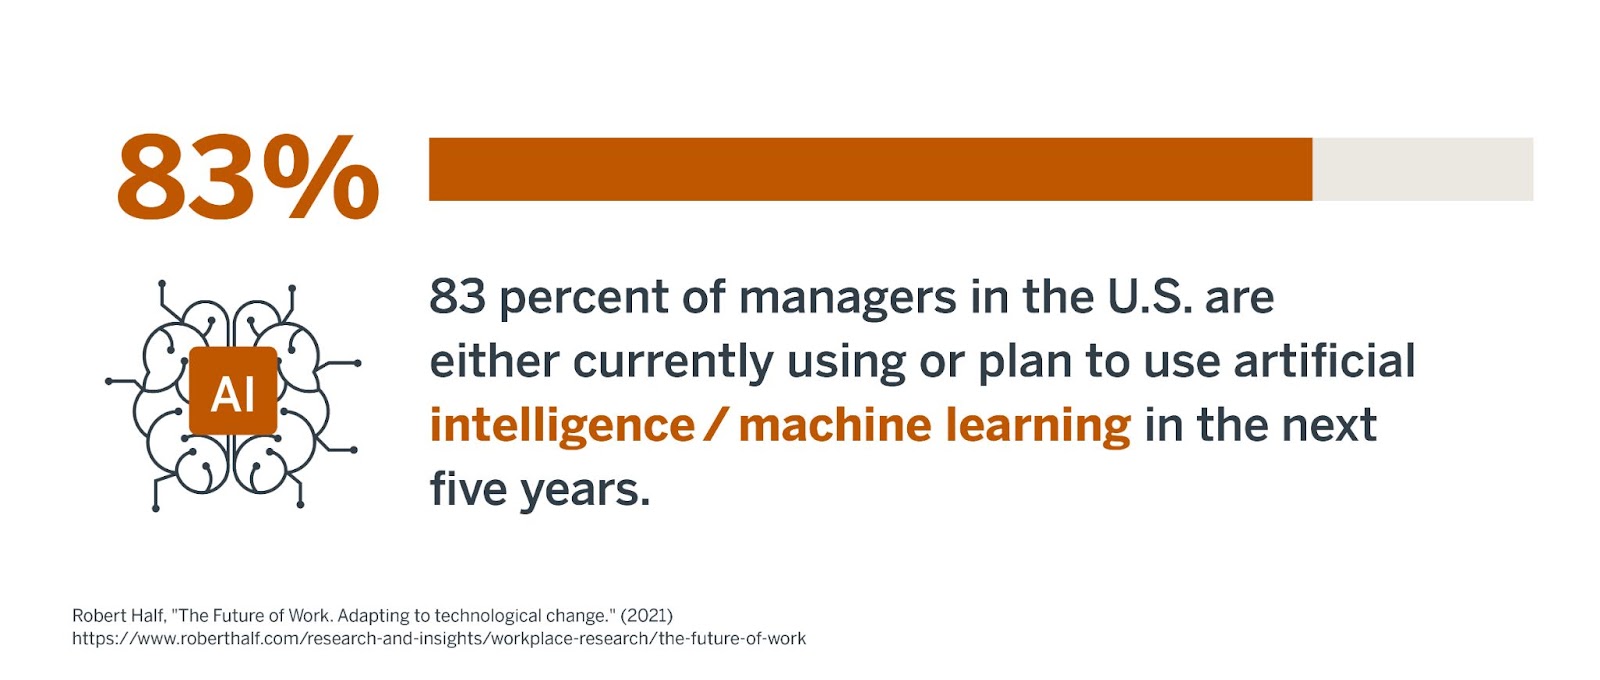 An image highlighting that 83% of managers are either using or plan to use artificial intelligence or machine learning in the next five years.